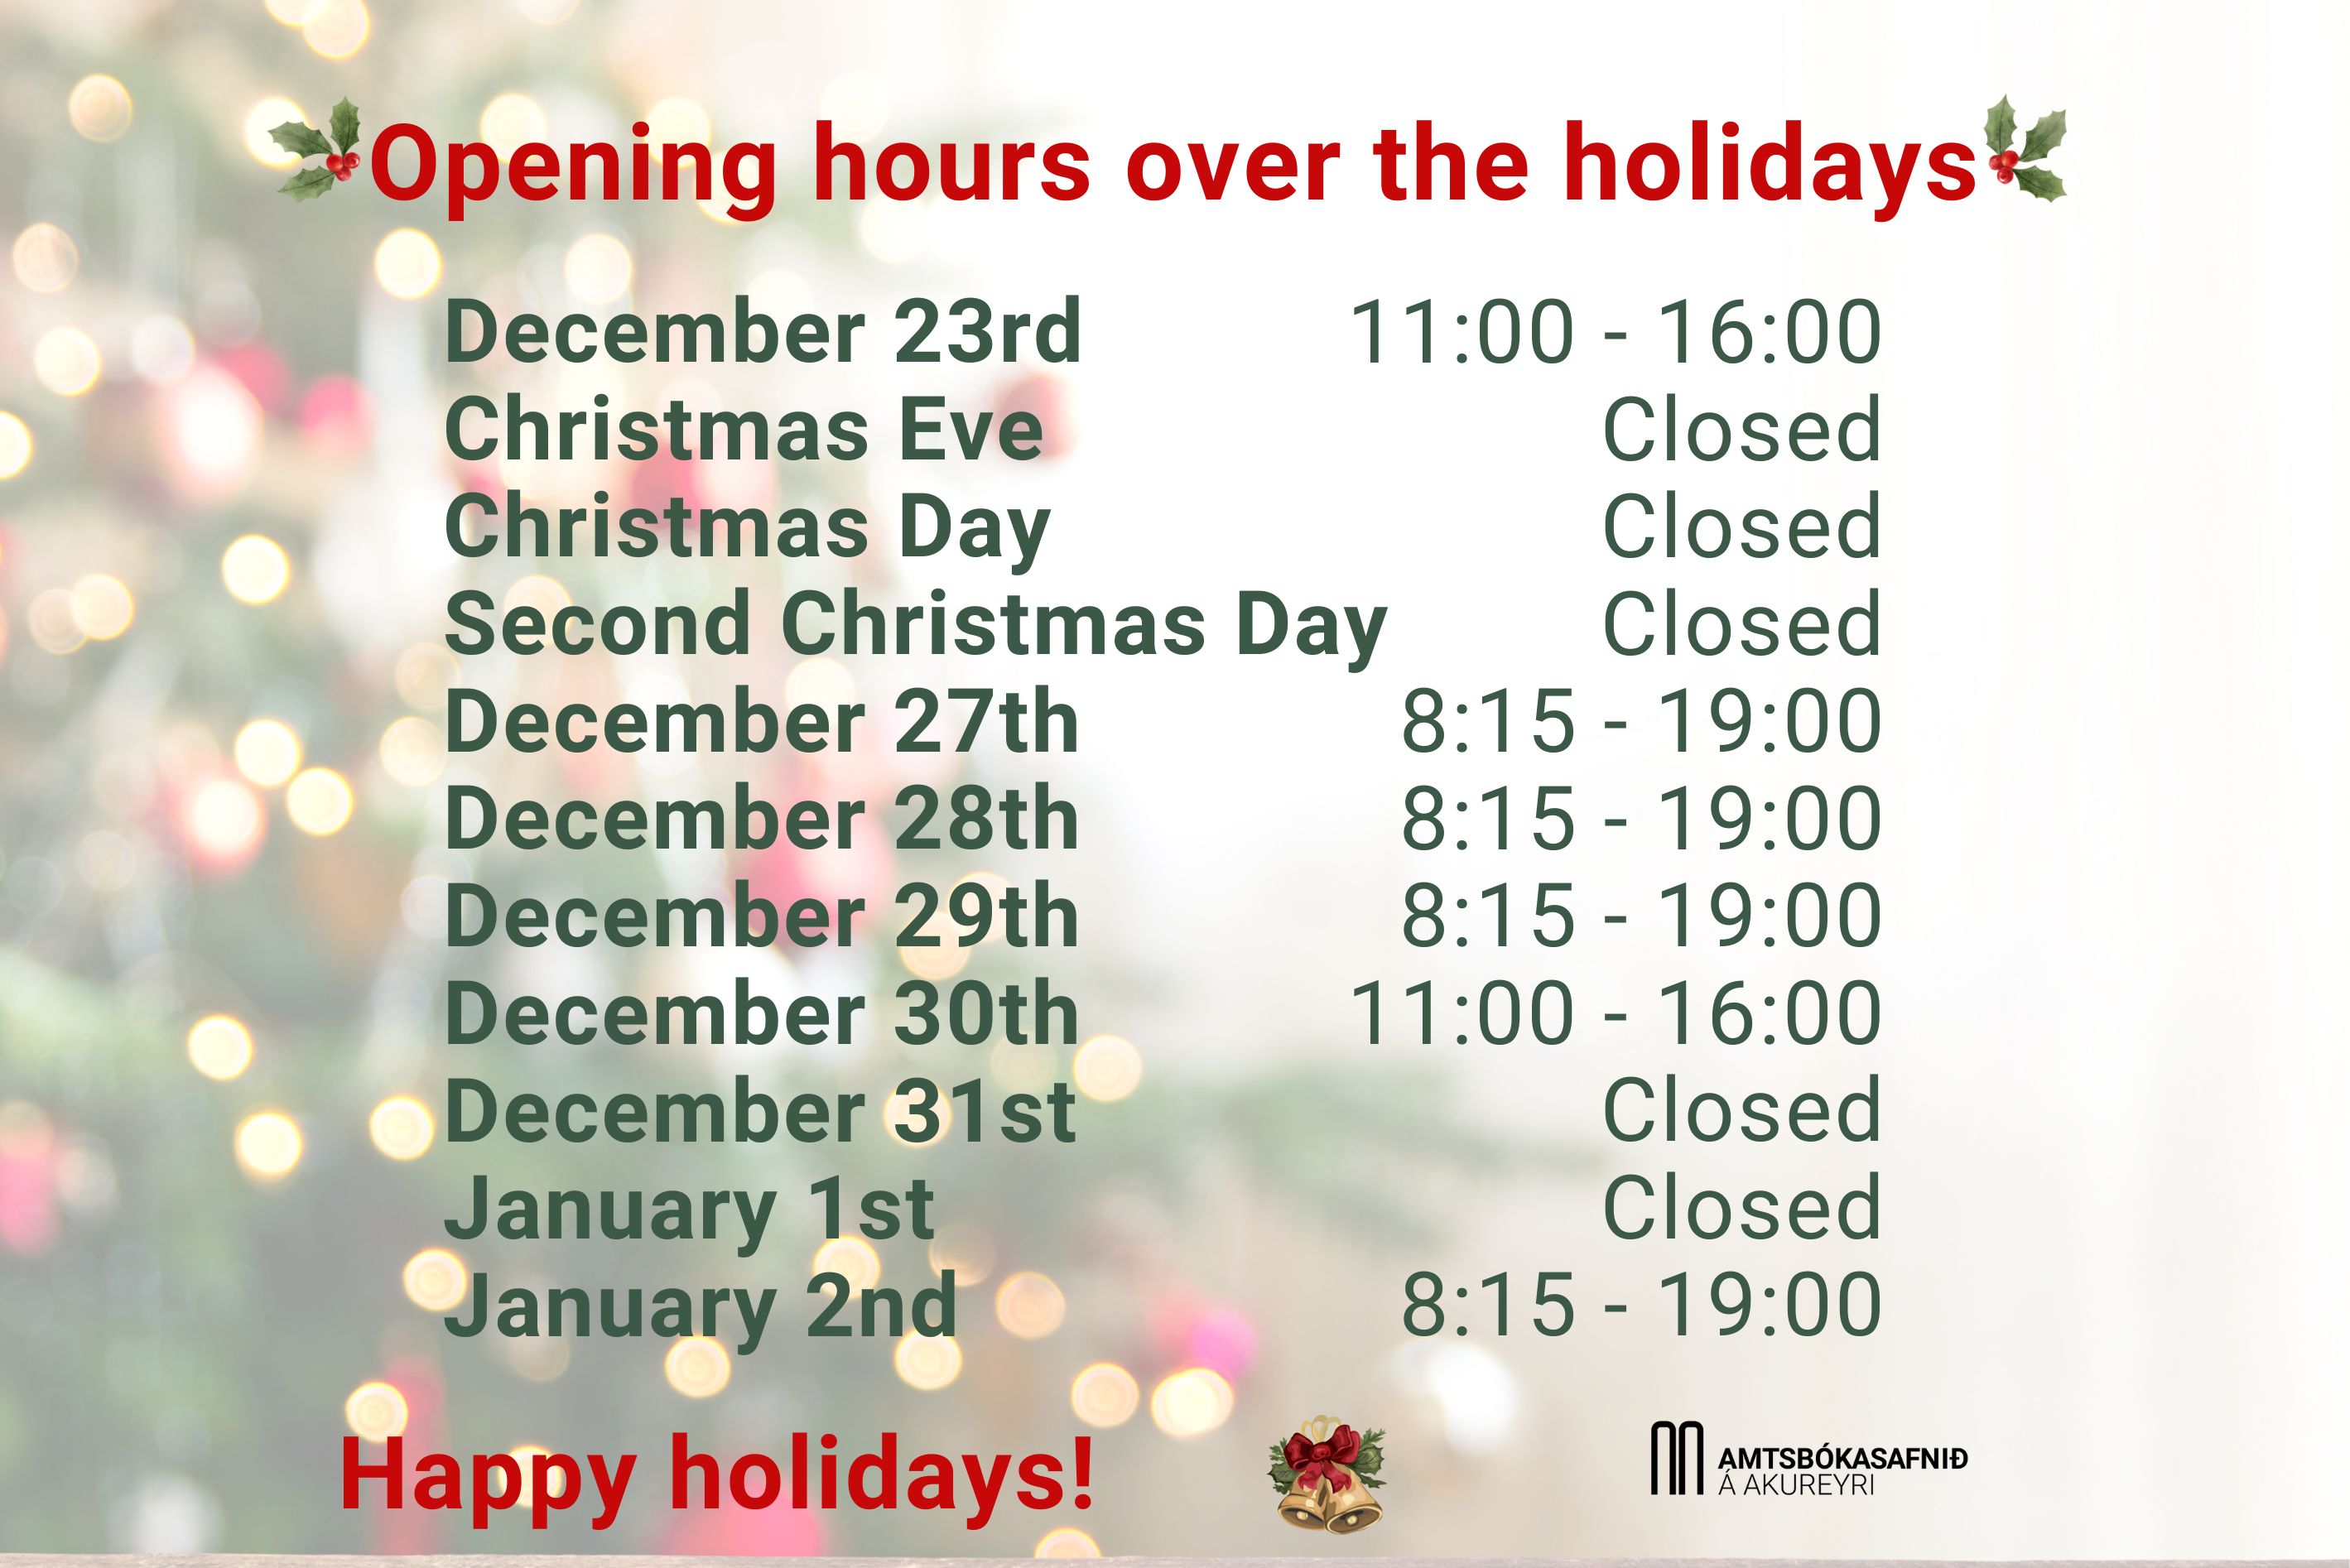 Opening hours of the library over Christmas and into the new year